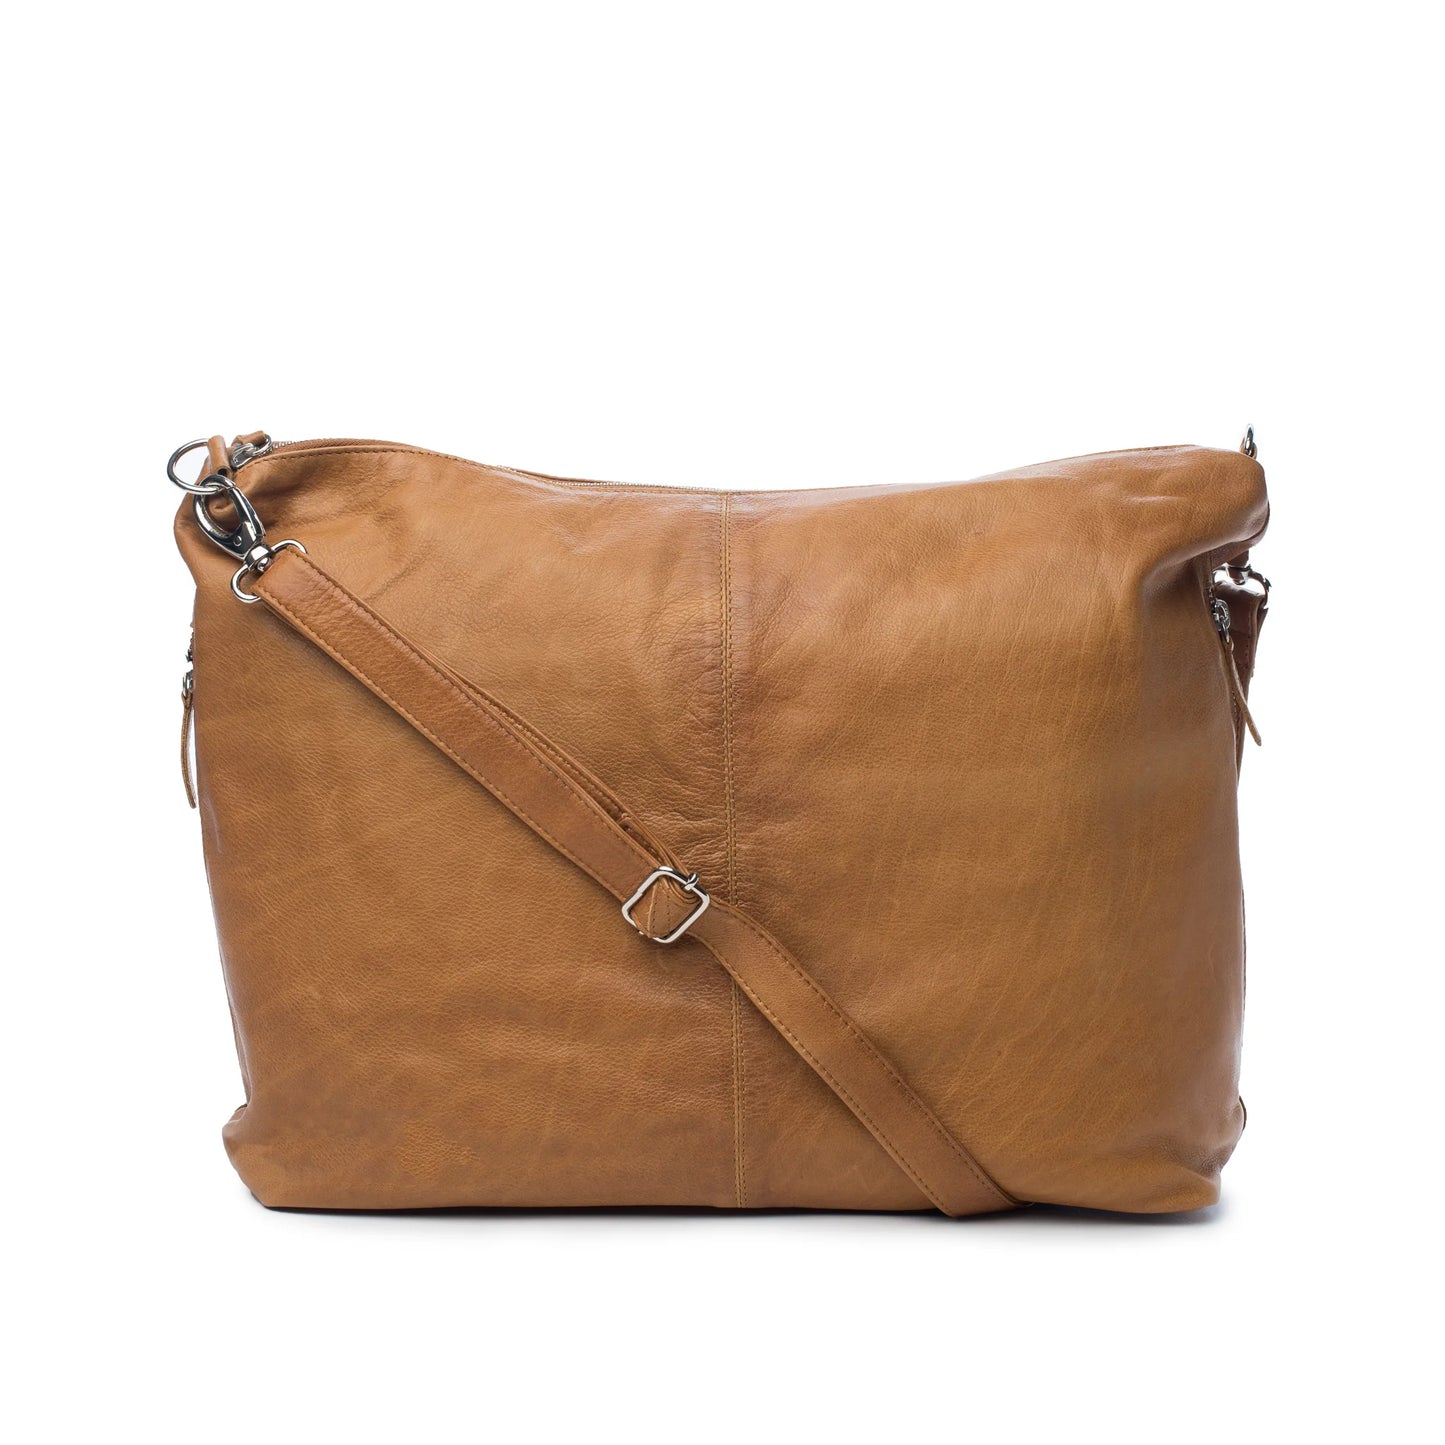 Load image into Gallery viewer, Dusky Robin Leather Adele Bag - Tan
